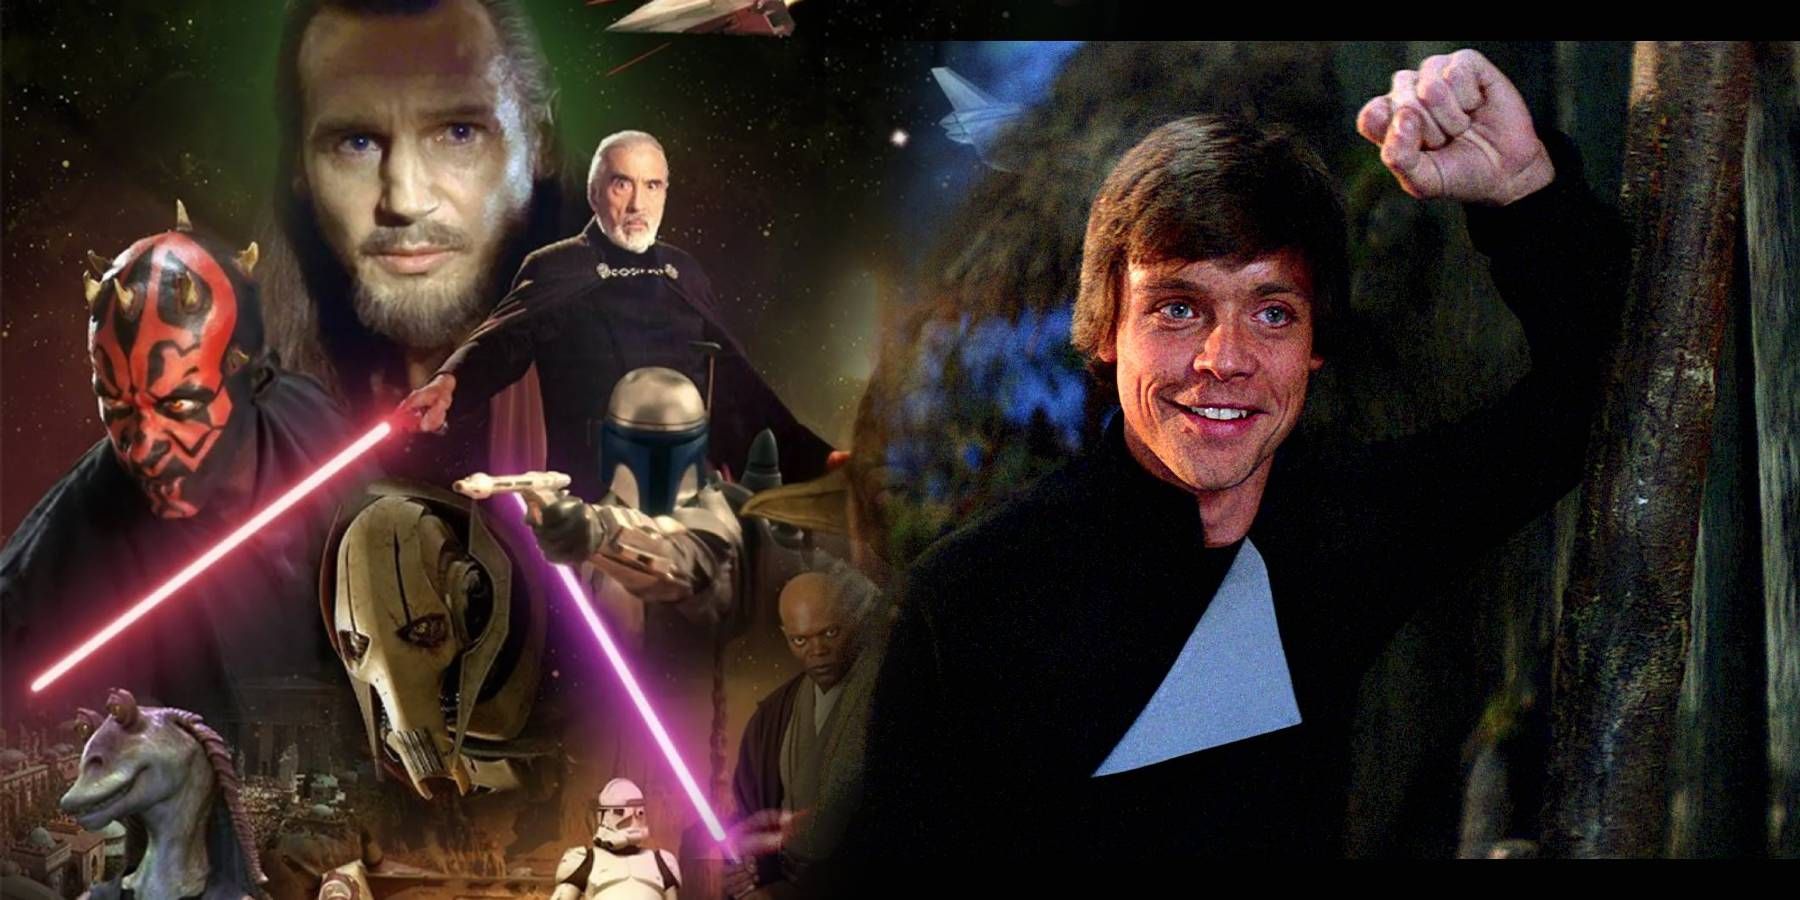 Poster art from the Star Wars prequels with Mark Hamill as Luke Skywalker in Return of the Jedi